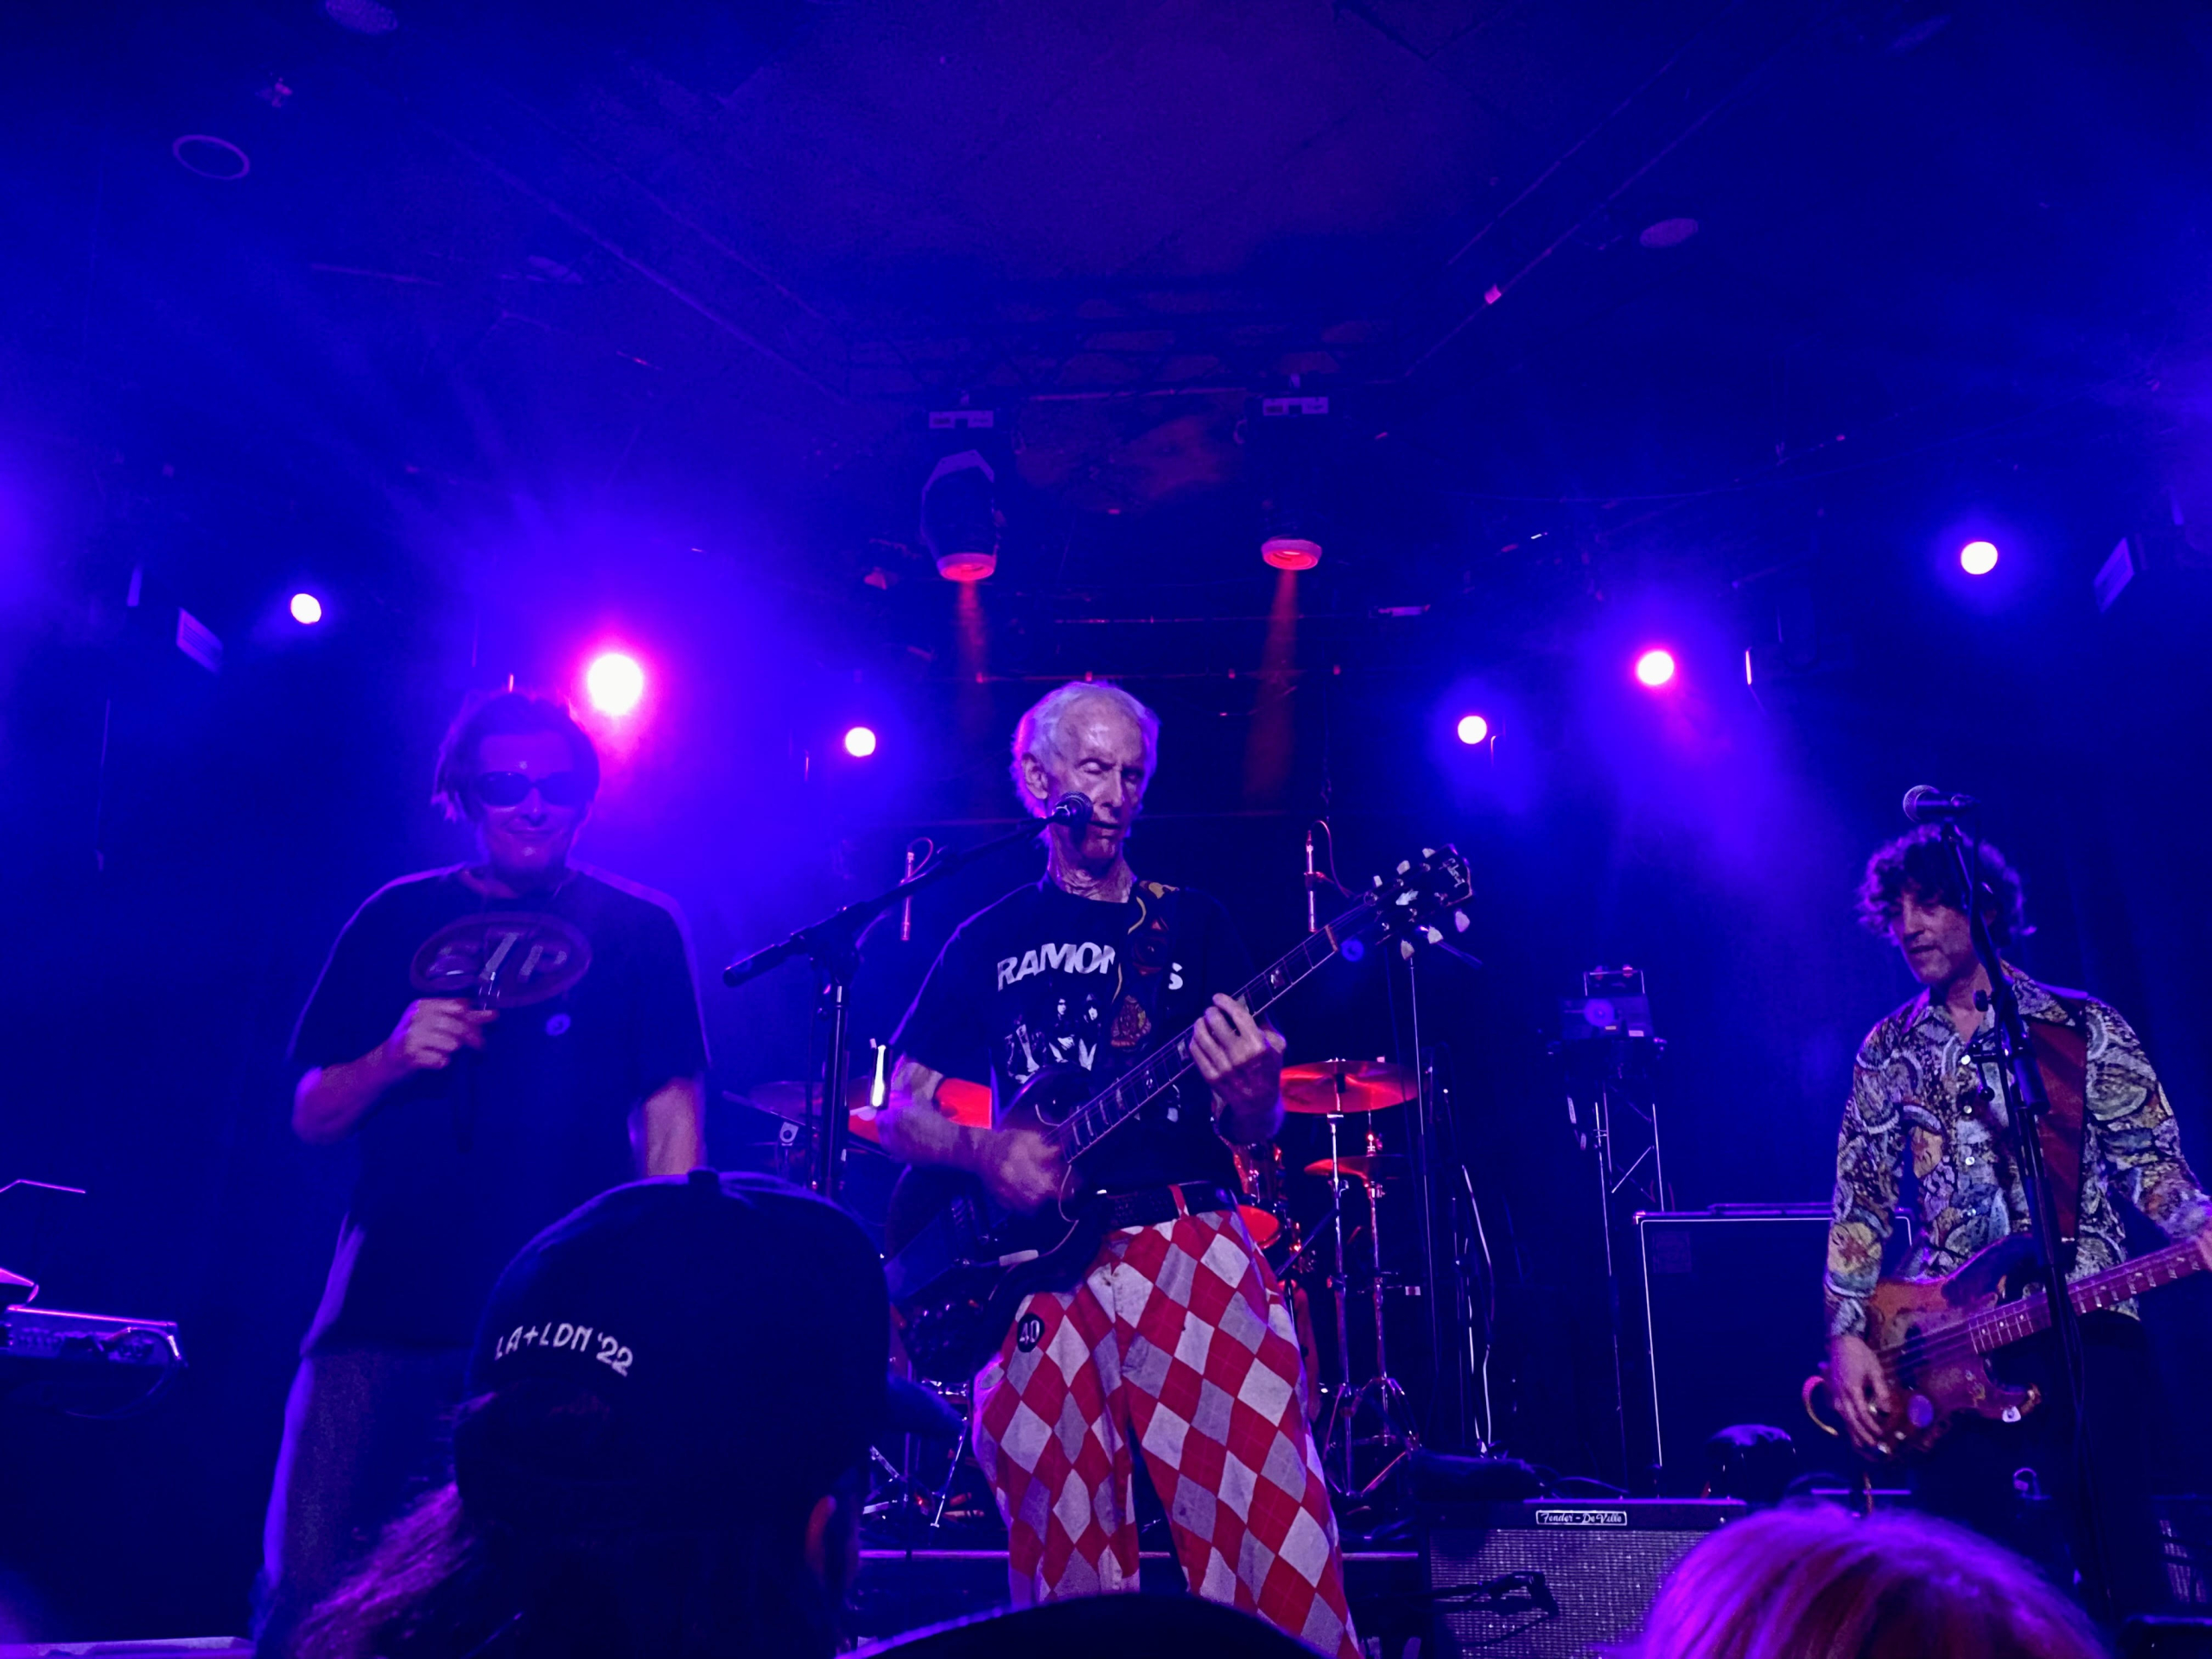 Robby Krieger Sets The Night on Fire At The Whisky A Go Go